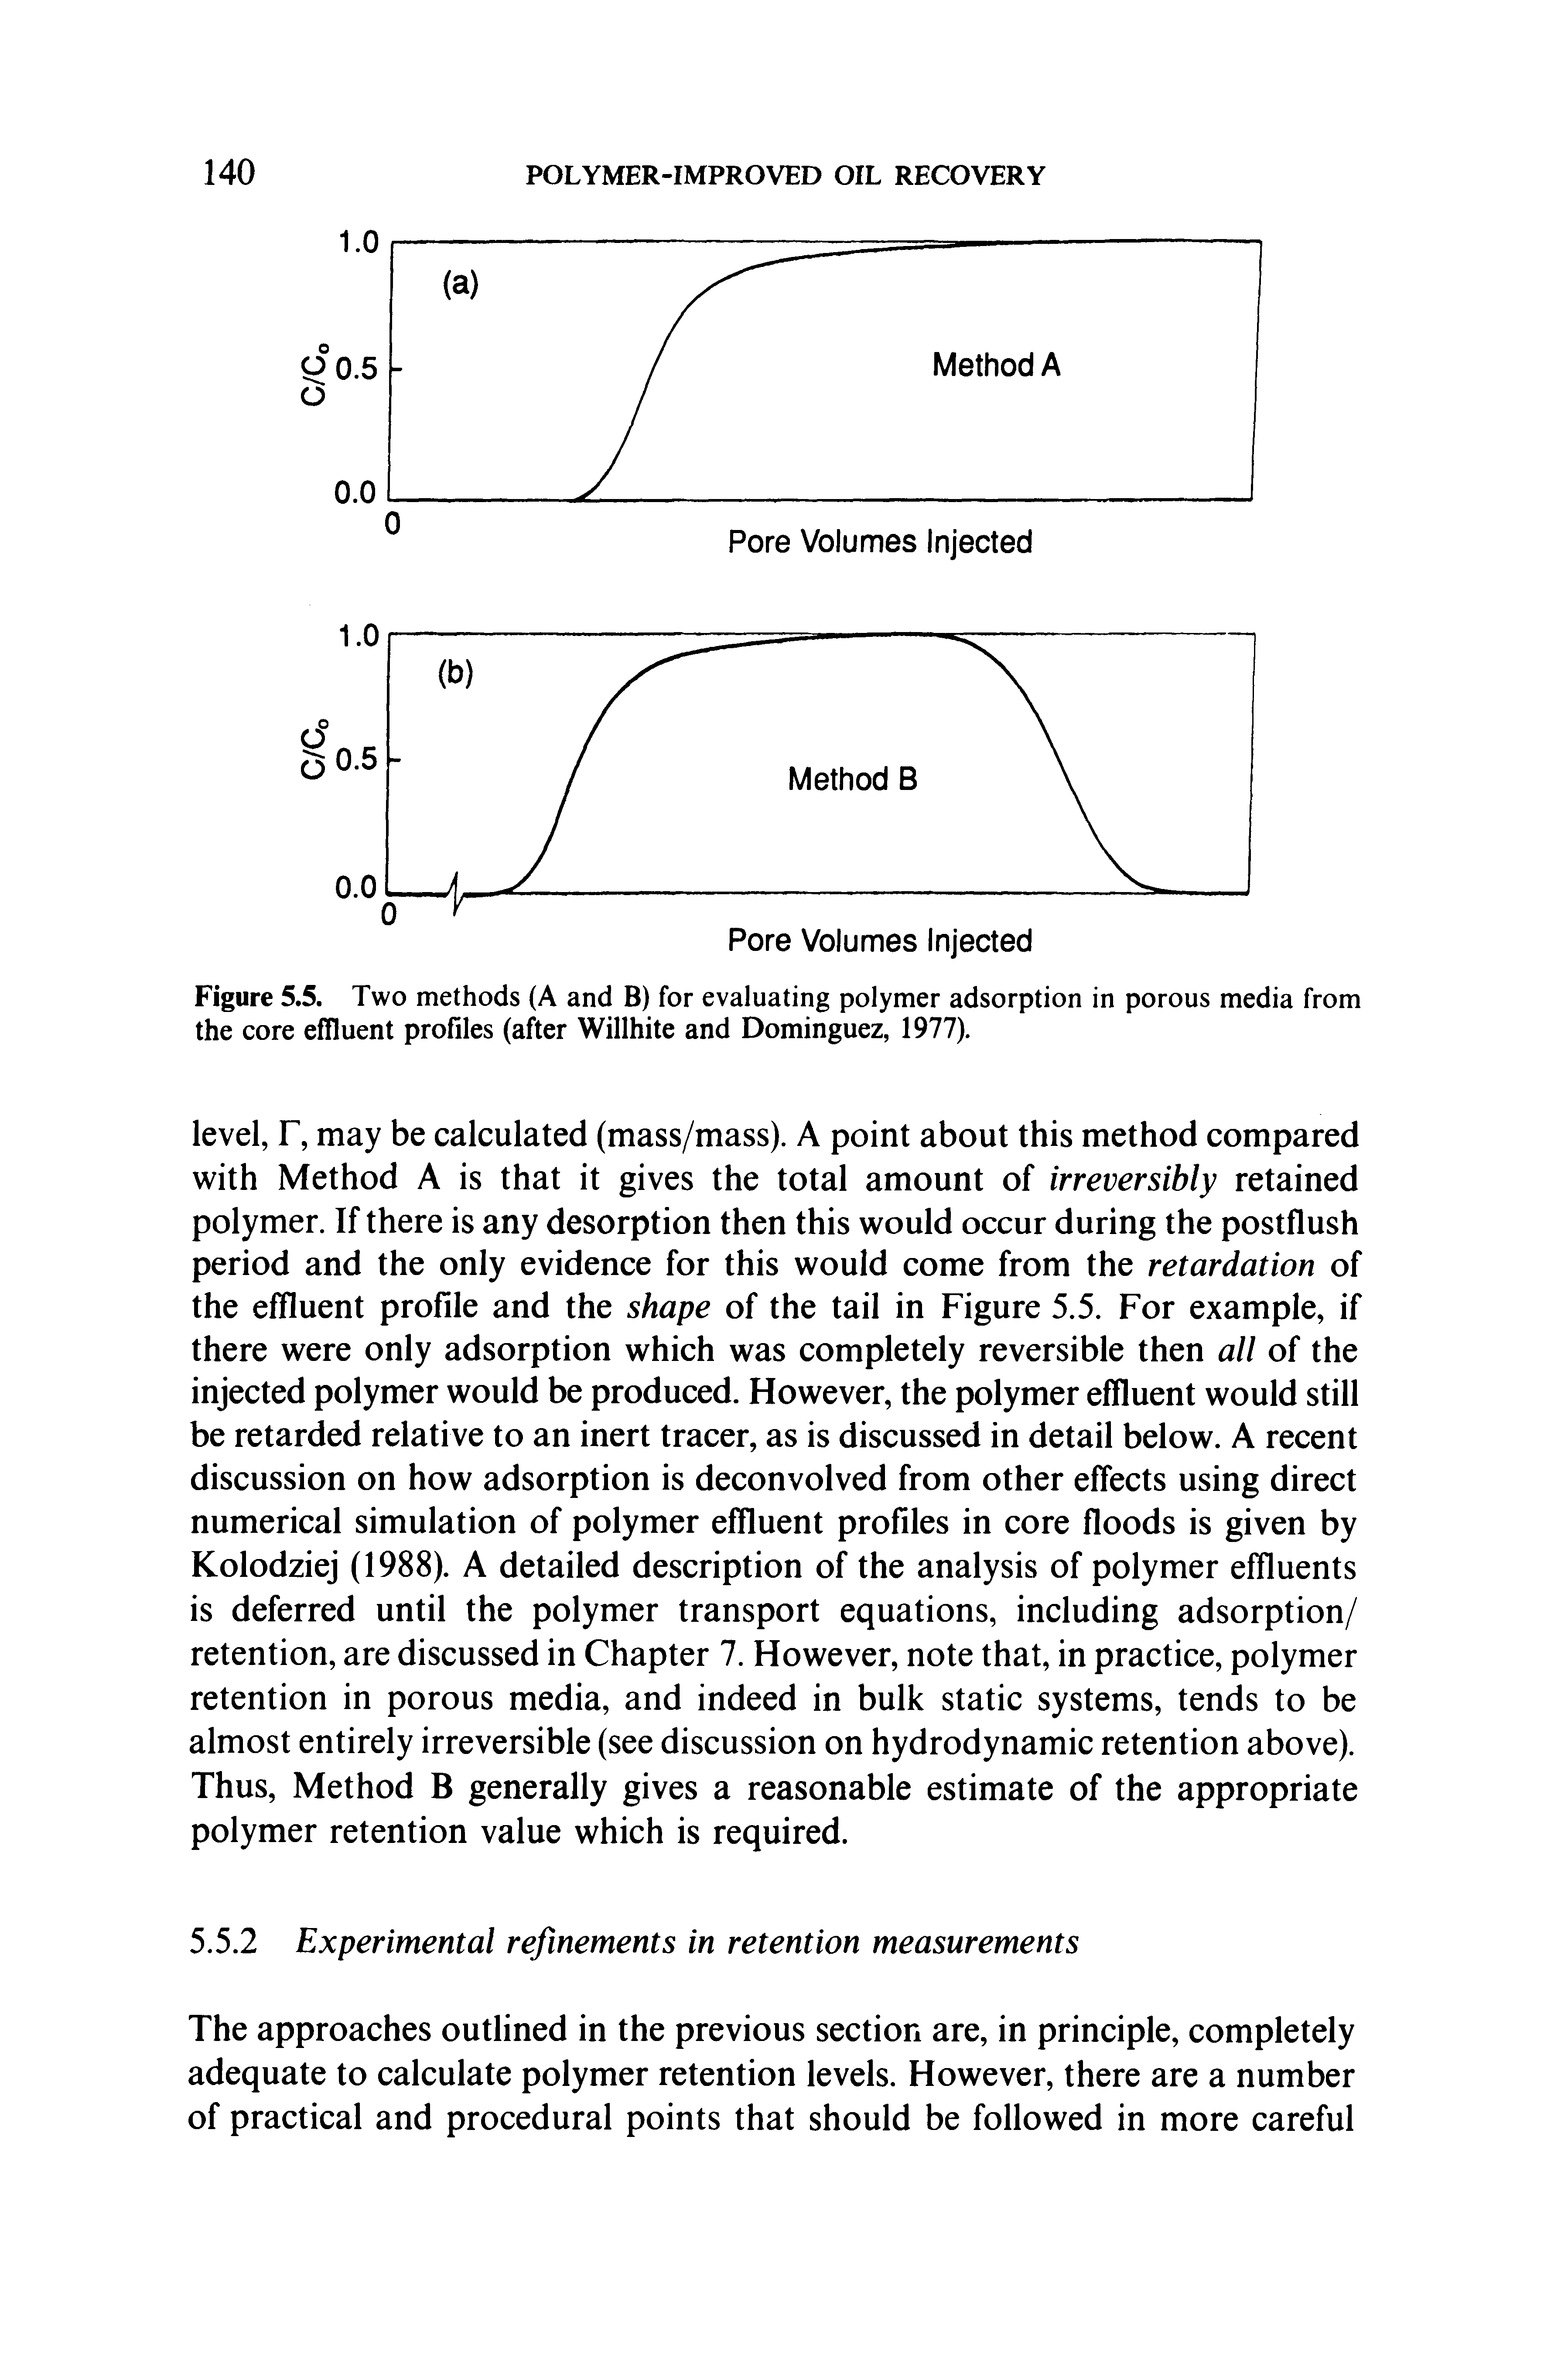 Figure 5.5. Two methods (A and B) for evaluating polymer adsorption in porous media from the core effluent profiles (after Willhite and Dominguez, 1977).